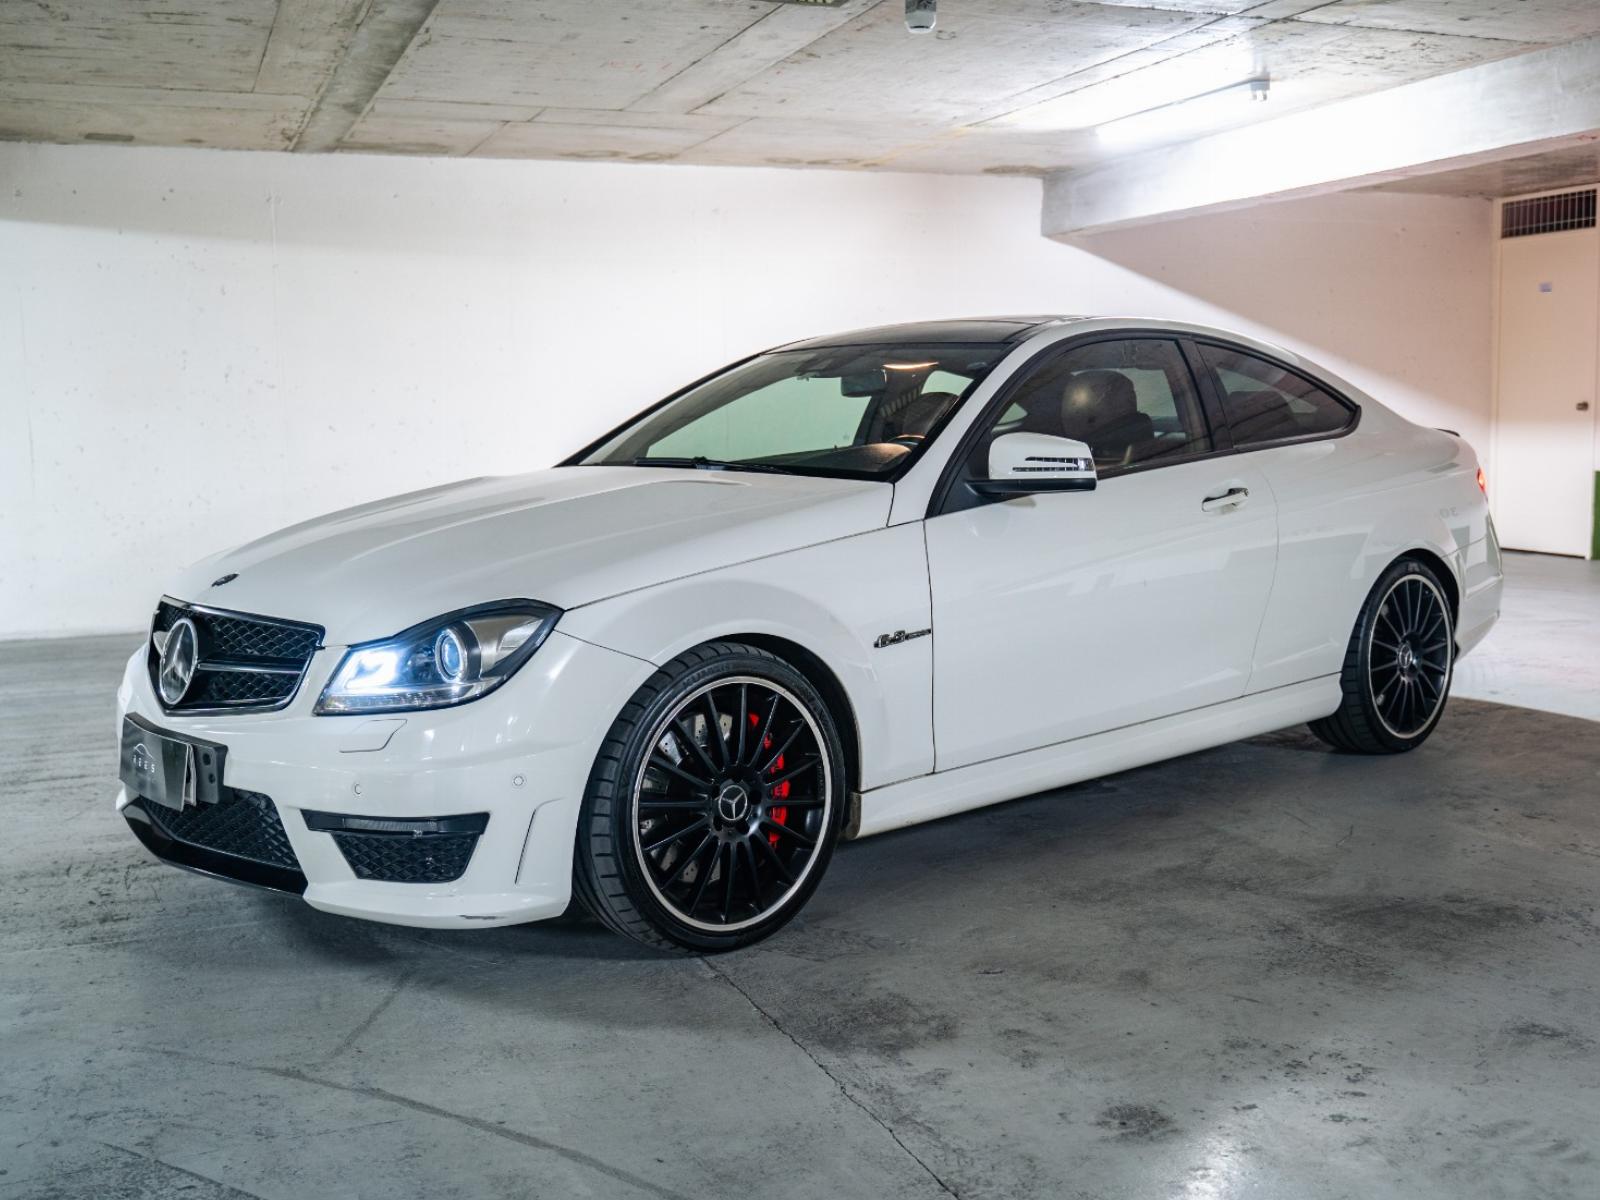 MERCEDES-BENZ C63 AMG Coupe 2013 6.2 LTS - 457 HP - 